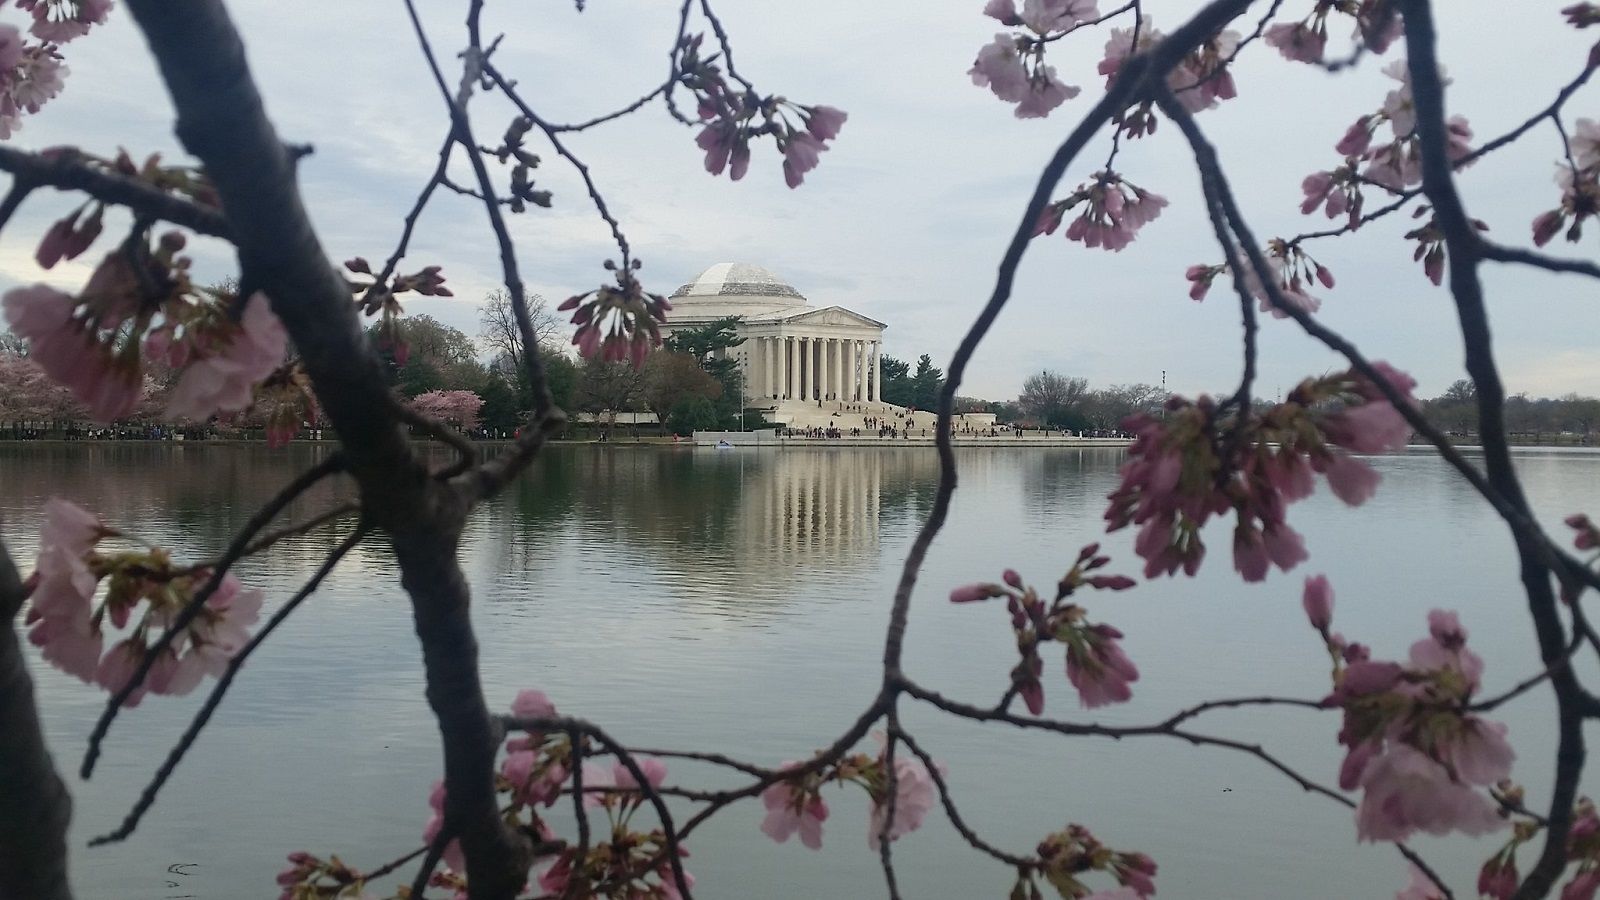 Because temperatures will not drop under 30 degrees, the cherry blossoms should be safe from any crucial damage, said Mike Litterst with the National Park Service. (WTOP/Kathy Stewart)